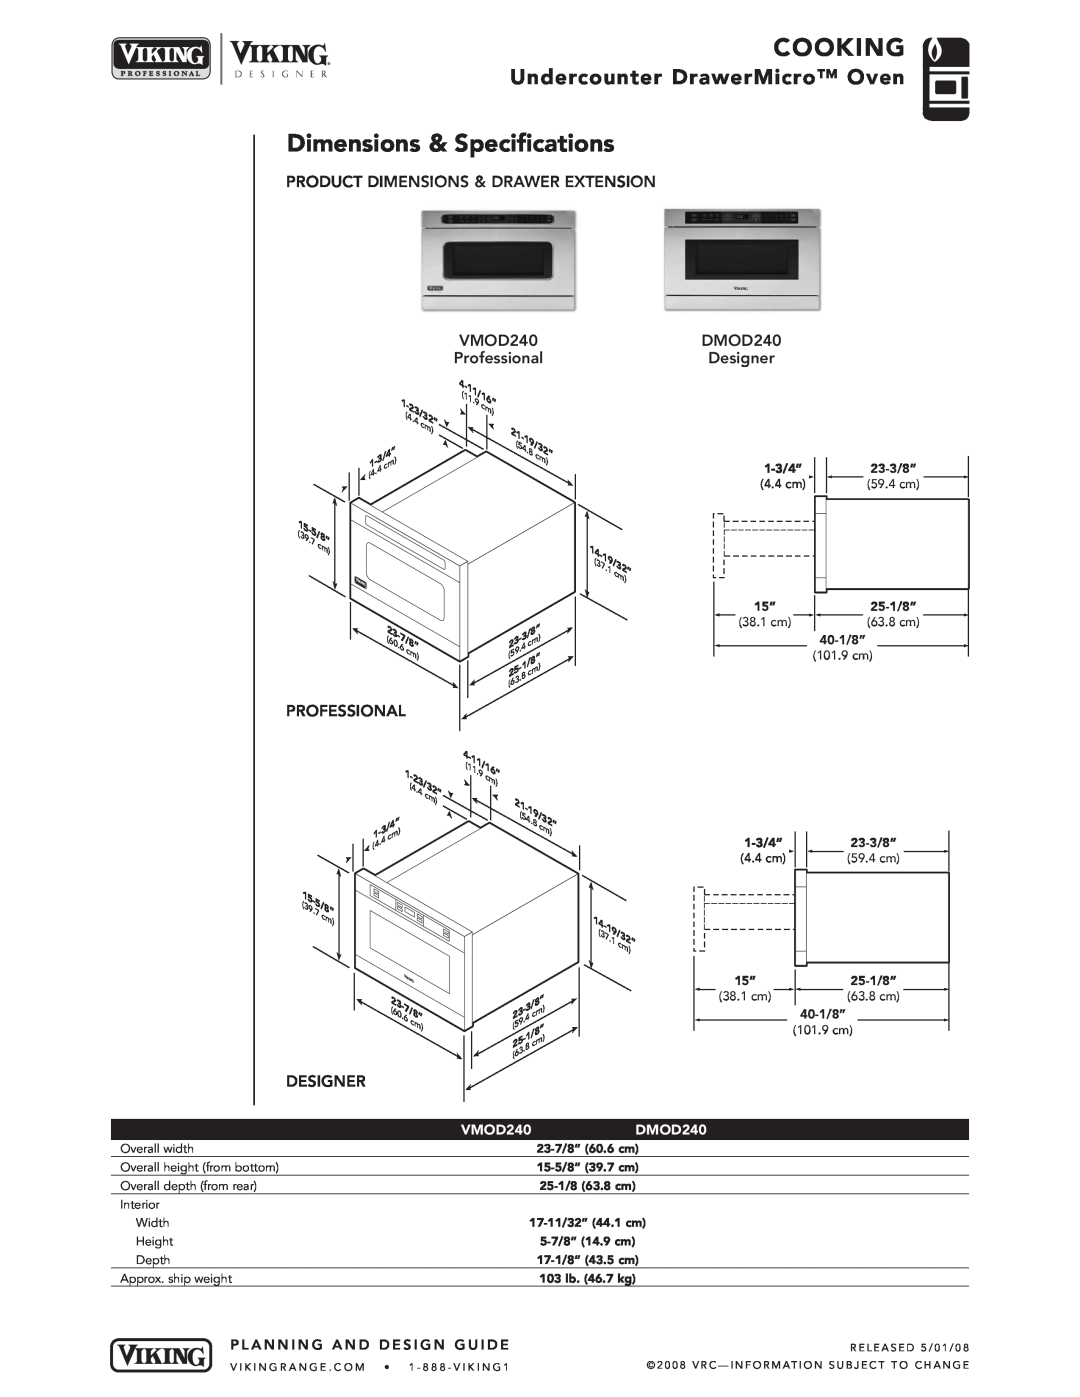 Viking Dimensions & Specifications, Product Dimensions & Drawer Extension, Professional, DMOD240 Designer, VMOD240 